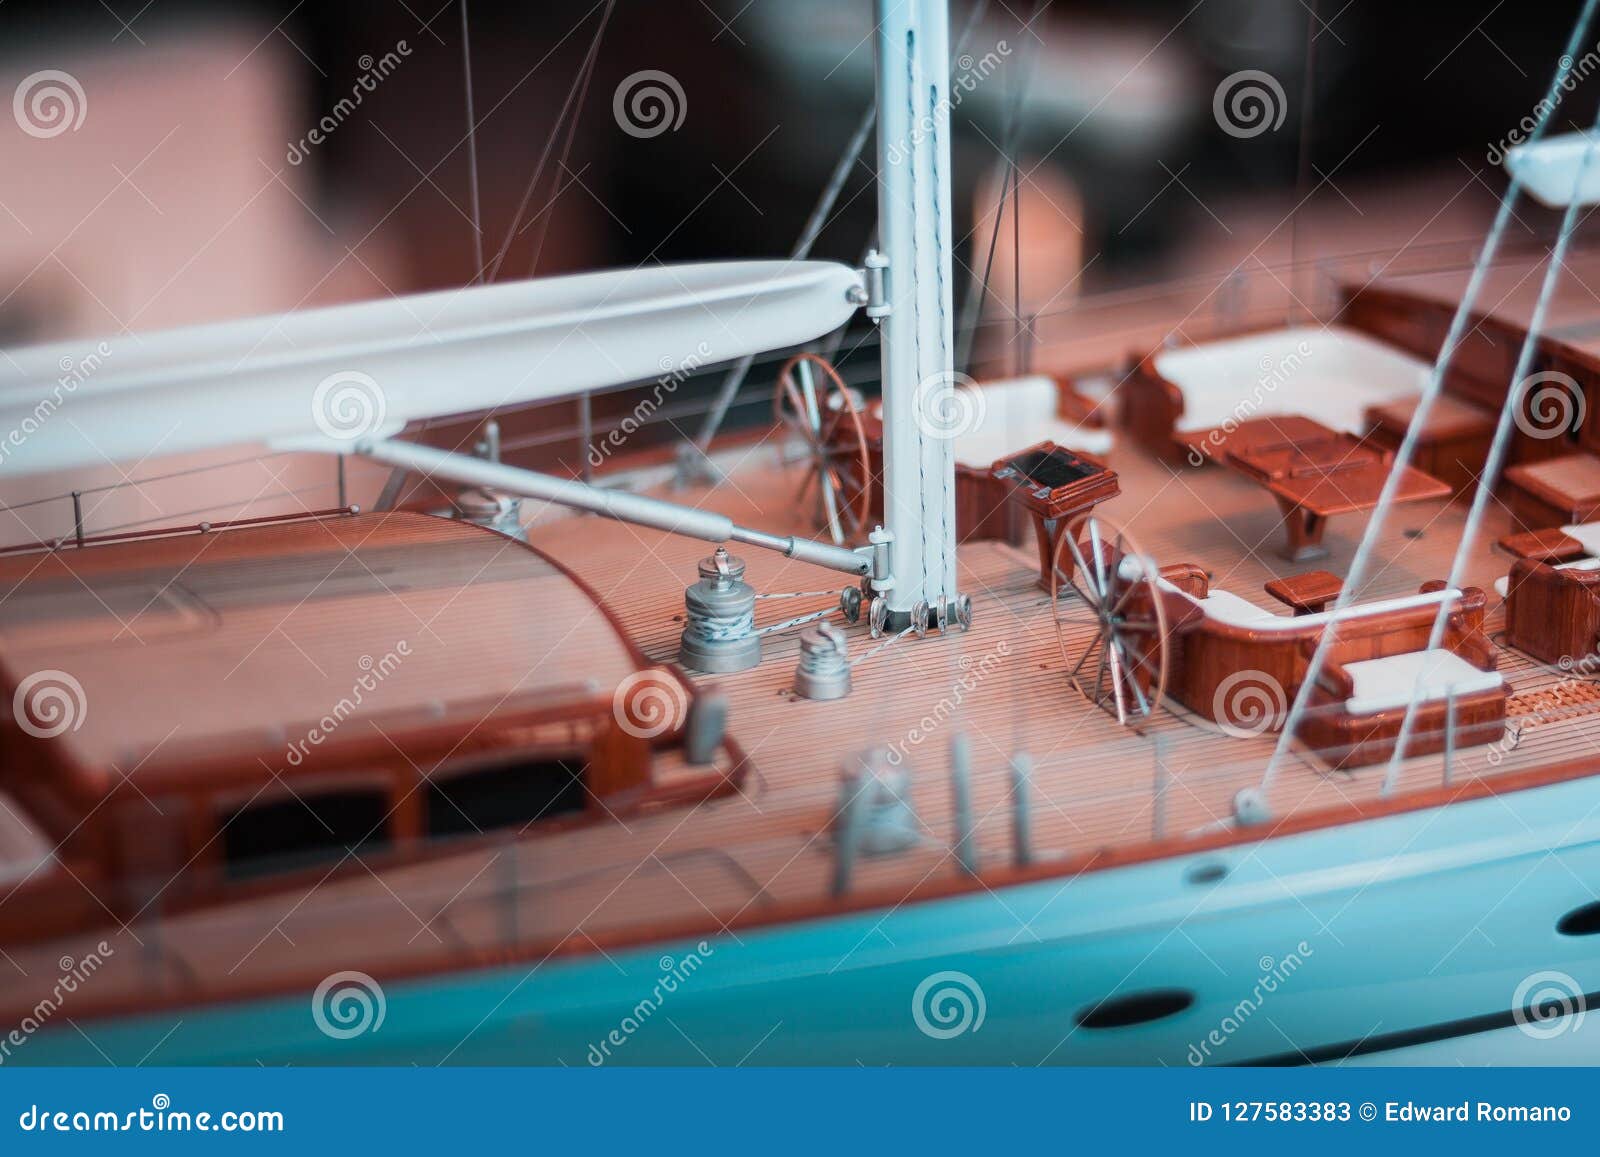 luxury, in scale, model yachts. sailing life, big projects